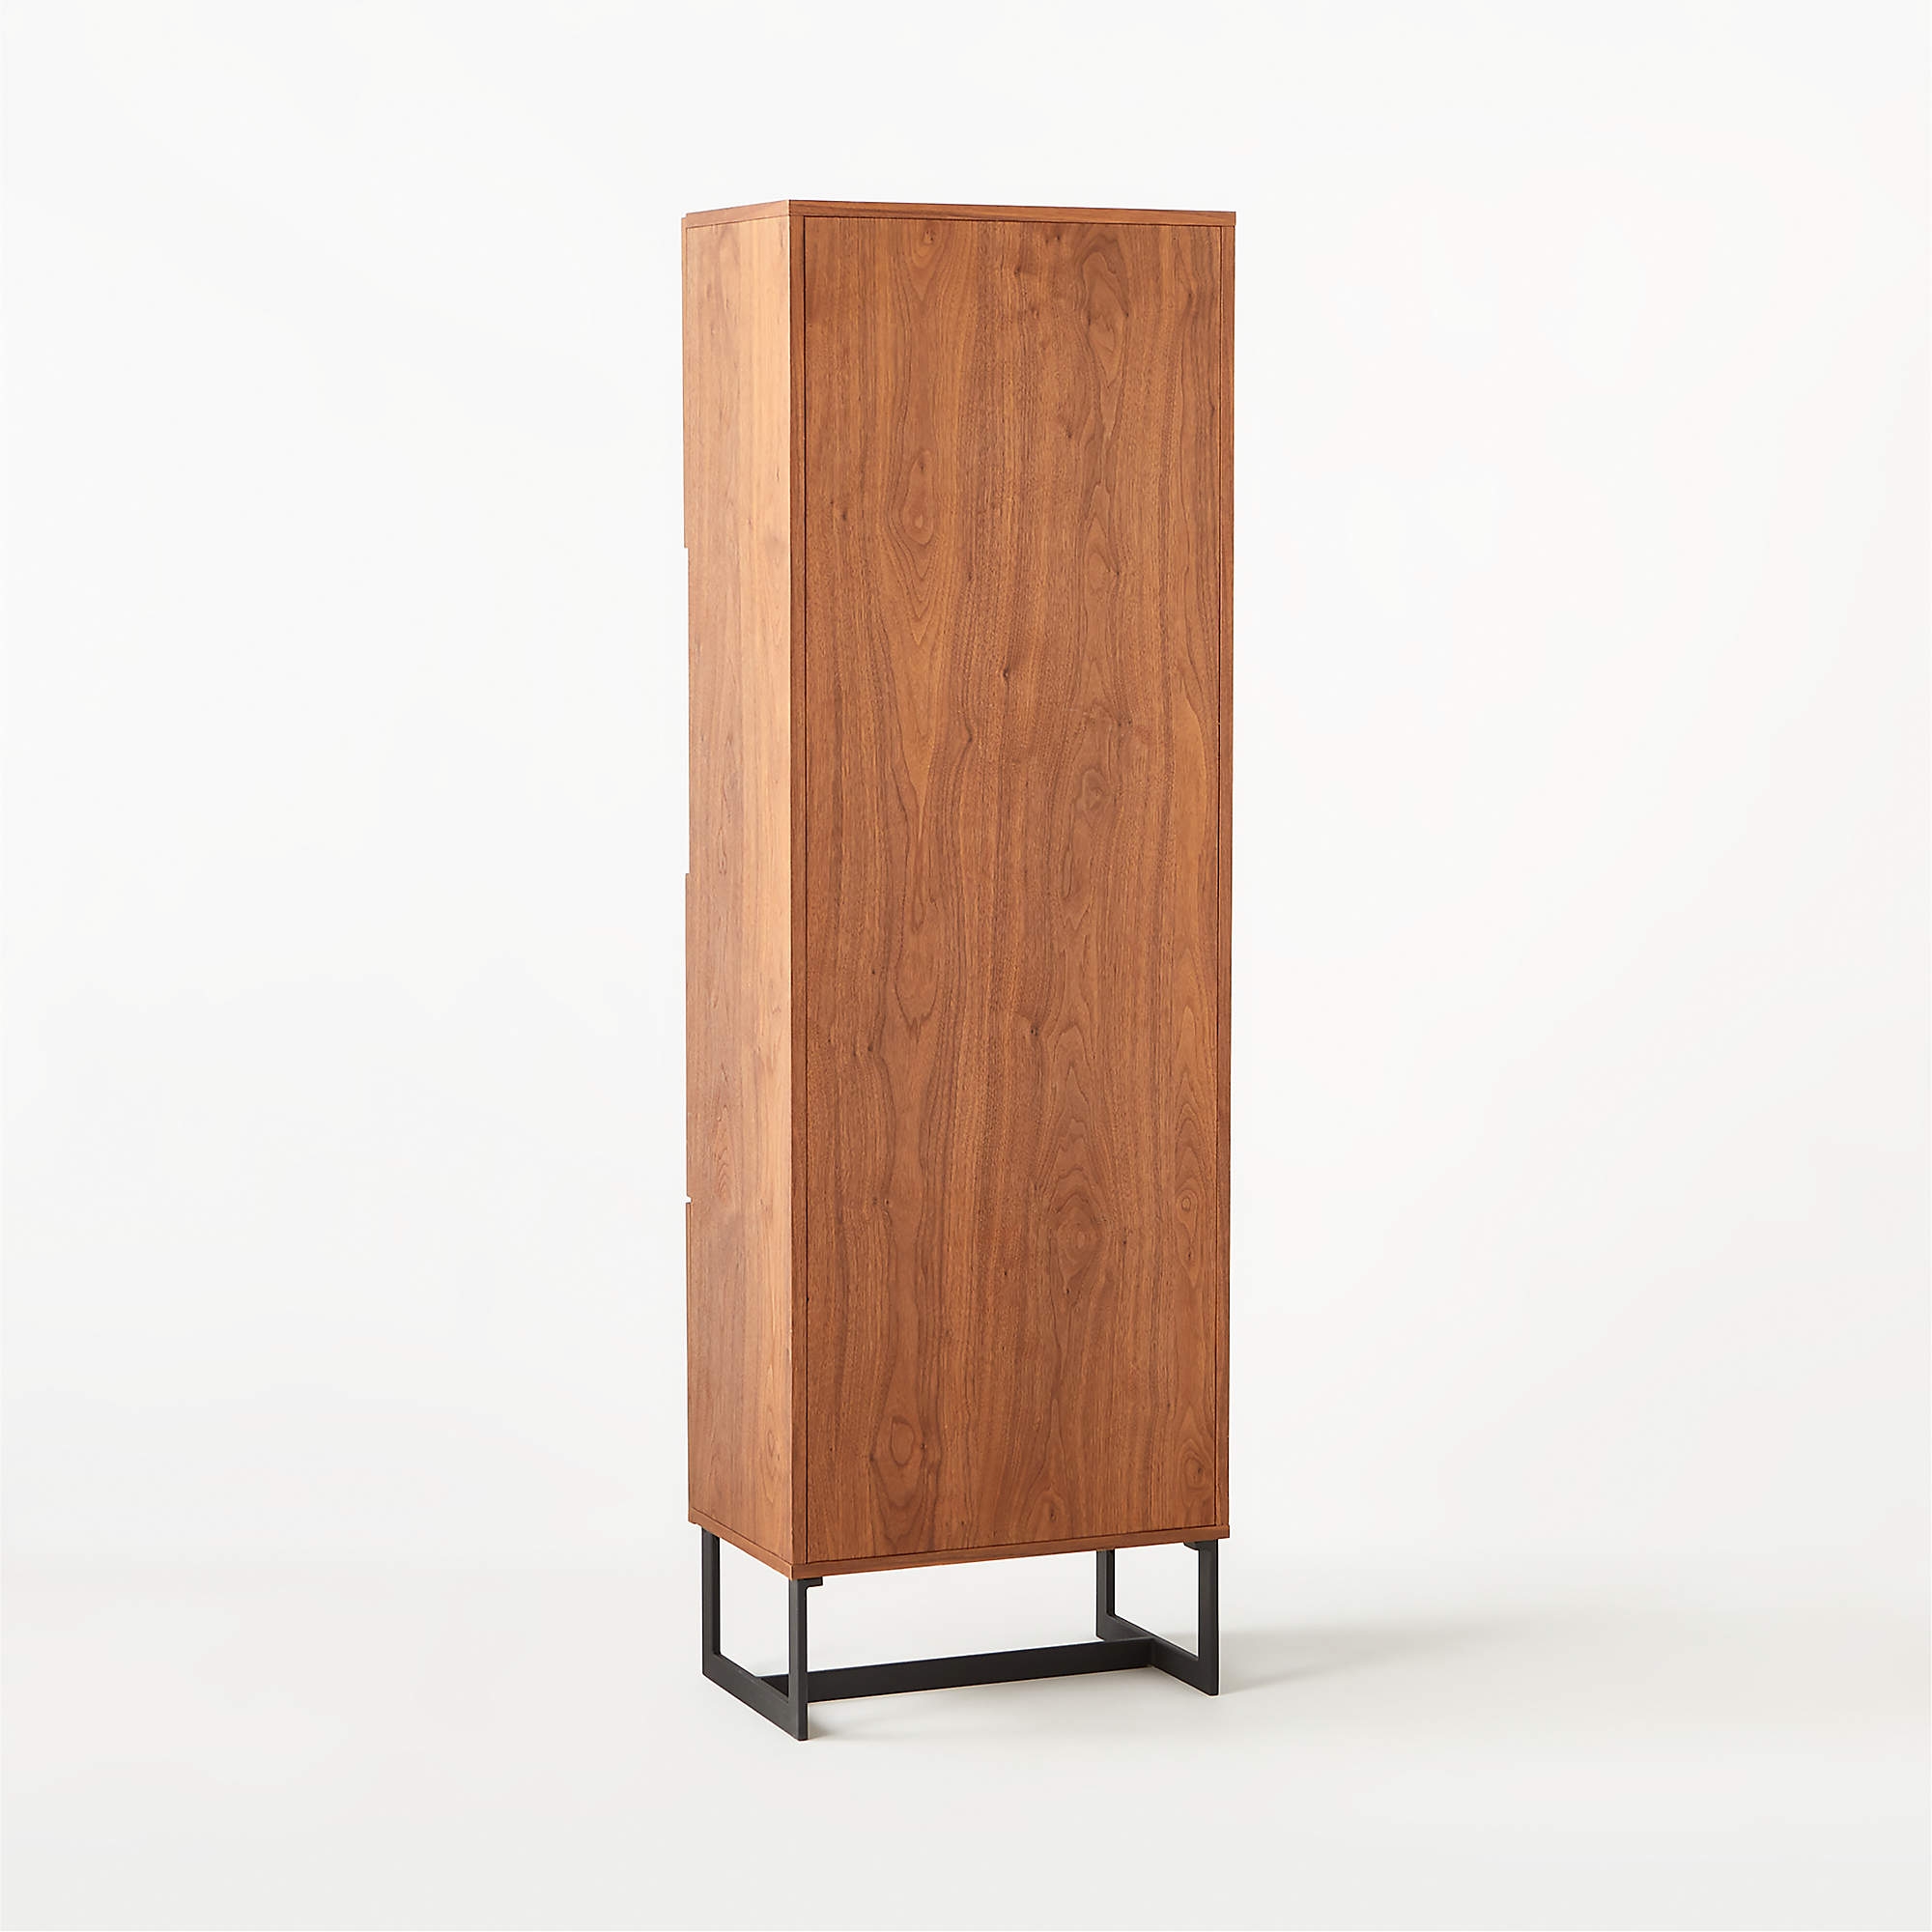 Suspend Tall Bar Cabinet, White Marble & Walnut - Image 4